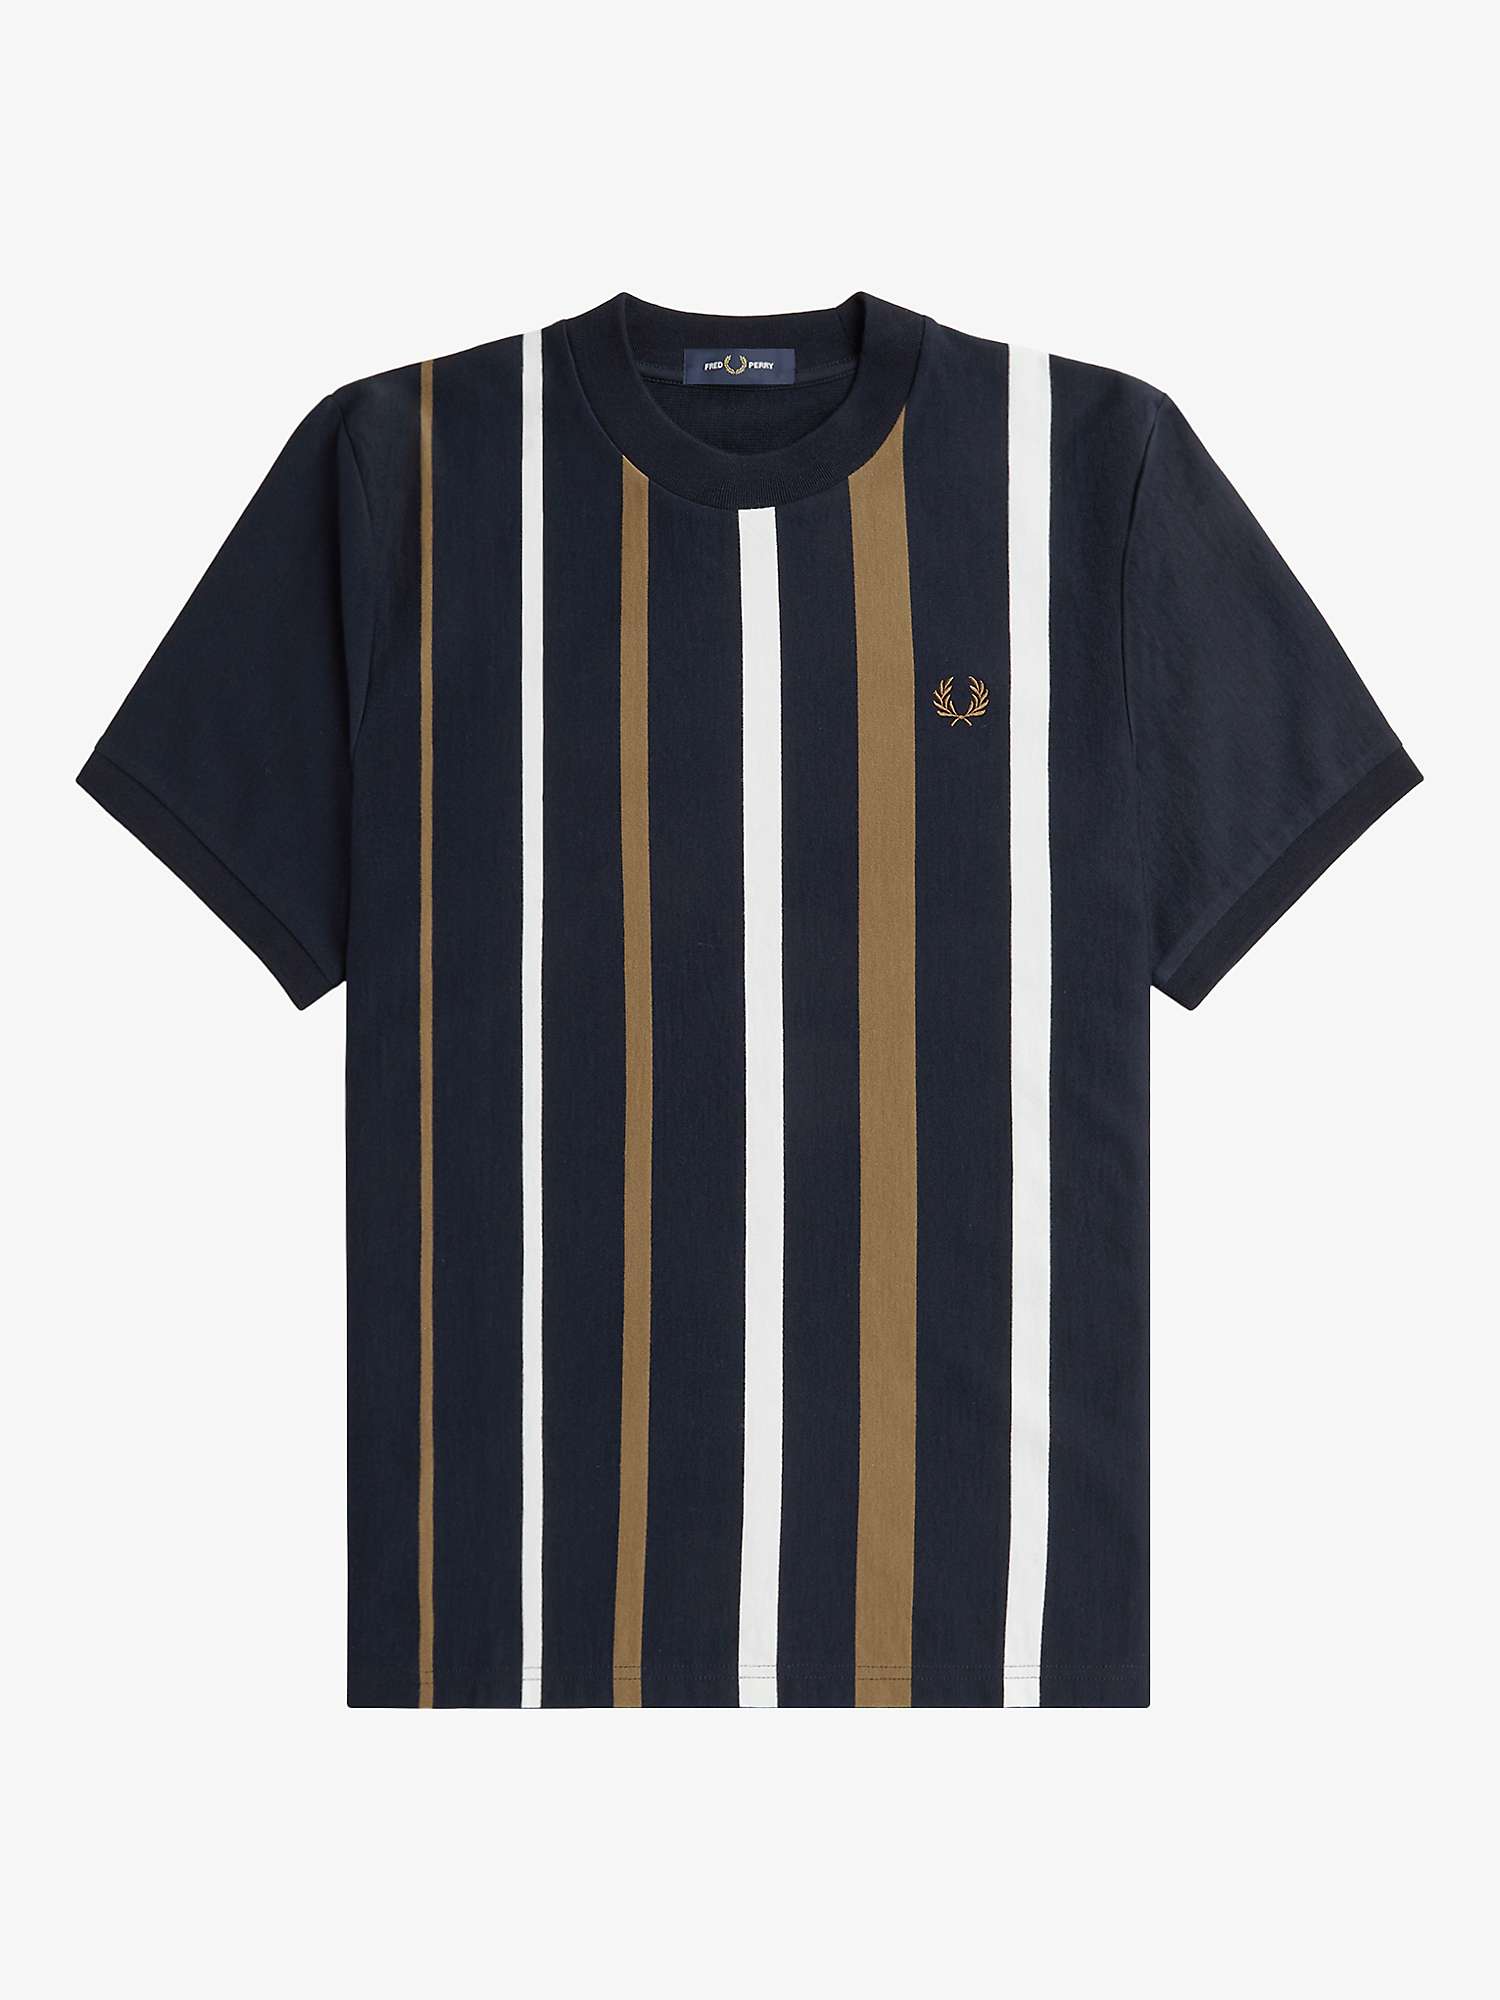 Buy Fred Perry Grad Stripe T-Shirt, Navy/Multi Online at johnlewis.com